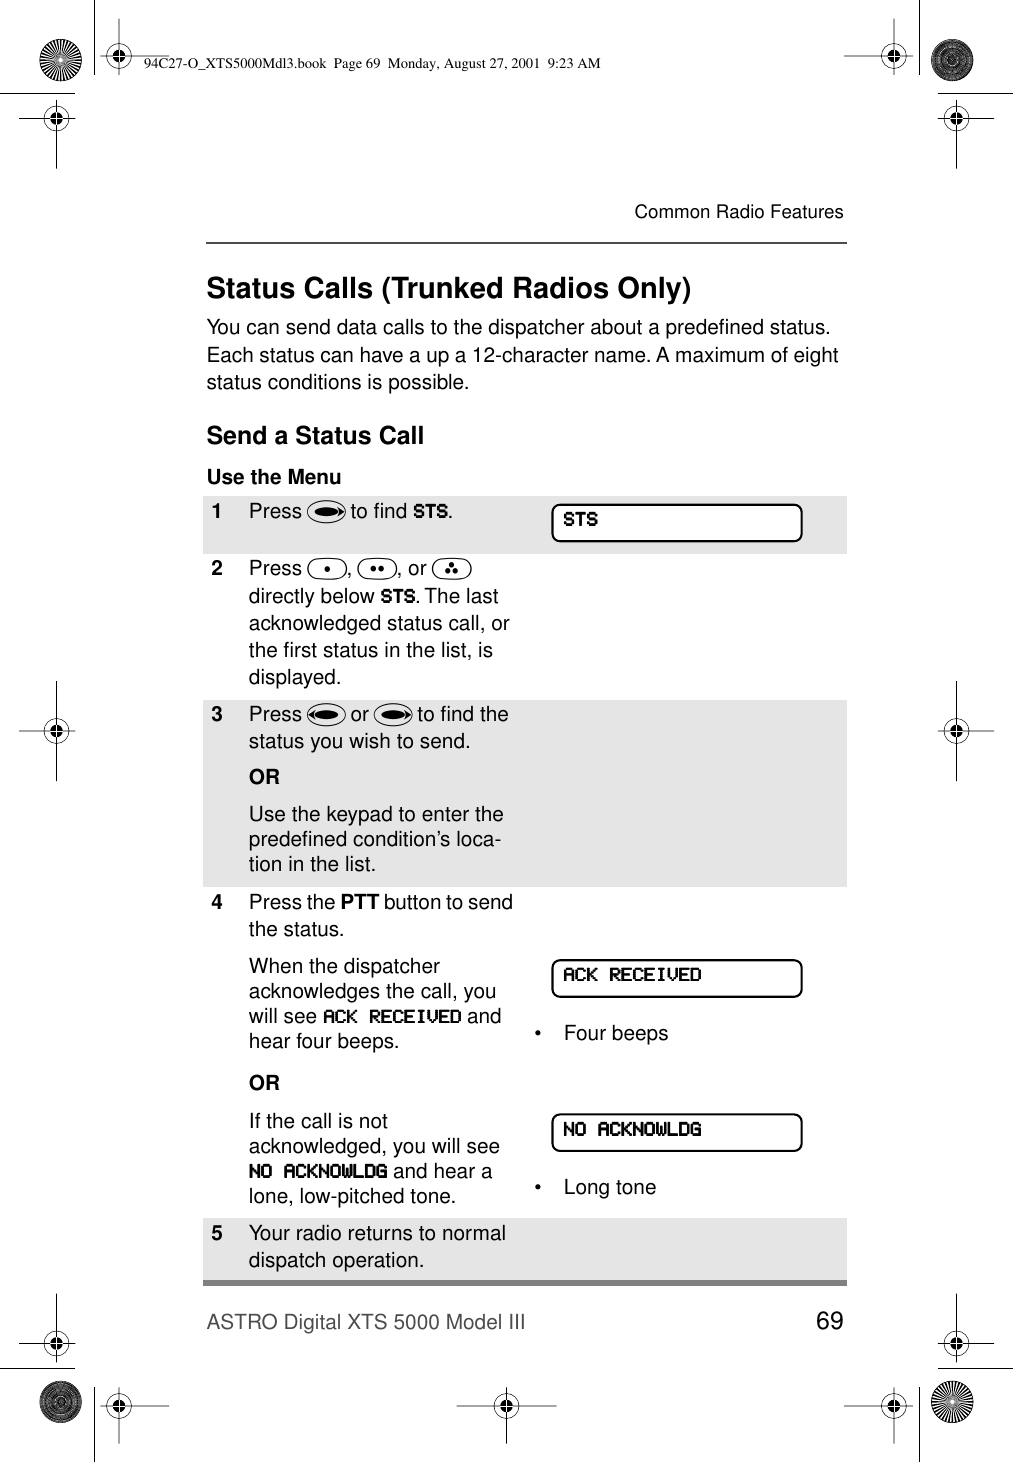 ASTRO Digital XTS 5000 Model III 69Common Radio FeaturesStatus Calls (Trunked Radios Only)You can send data calls to the dispatcher about a predeﬁned status. Each status can have a up a 12-character name. A maximum of eight status conditions is possible.Send a Status CallUse the Menu1Press U to ﬁnd SSSSTTTTSSSS.2Press D, E, or F directly below SSSSTTTTSSSS. The last acknowledged status call, or the ﬁrst status in the list, is displayed.3Press V or U to ﬁnd the status you wish to send.ORUse the keypad to enter the predeﬁned condition’s loca-tion in the list. 4Press the PTT button to send the status.When the dispatcher acknowledges the call, you will see AAAACCCCKKKK    RRRREEEECCCCEEEEIIIIVVVVEEEEDDDD and hear four beeps.OR• Four beepsIf the call is not acknowledged, you will see NNNNOOOO    AAAACCCCKKKKNNNNOOOOWWWWLLLLDDDDGGGG and hear a lone, low-pitched tone. • Long tone5Your radio returns to normal dispatch operation.SSSSTTTTSSSSAAAACCCCKKKK    RRRREEEECCCCEEEEIIIIVVVVEEEEDDDDNNNNOOOO    AAAACCCCKKKKNNNNOOOOWWWWLLLLDDDDGGGG94C27-O_XTS5000Mdl3.book  Page 69  Monday, August 27, 2001  9:23 AM